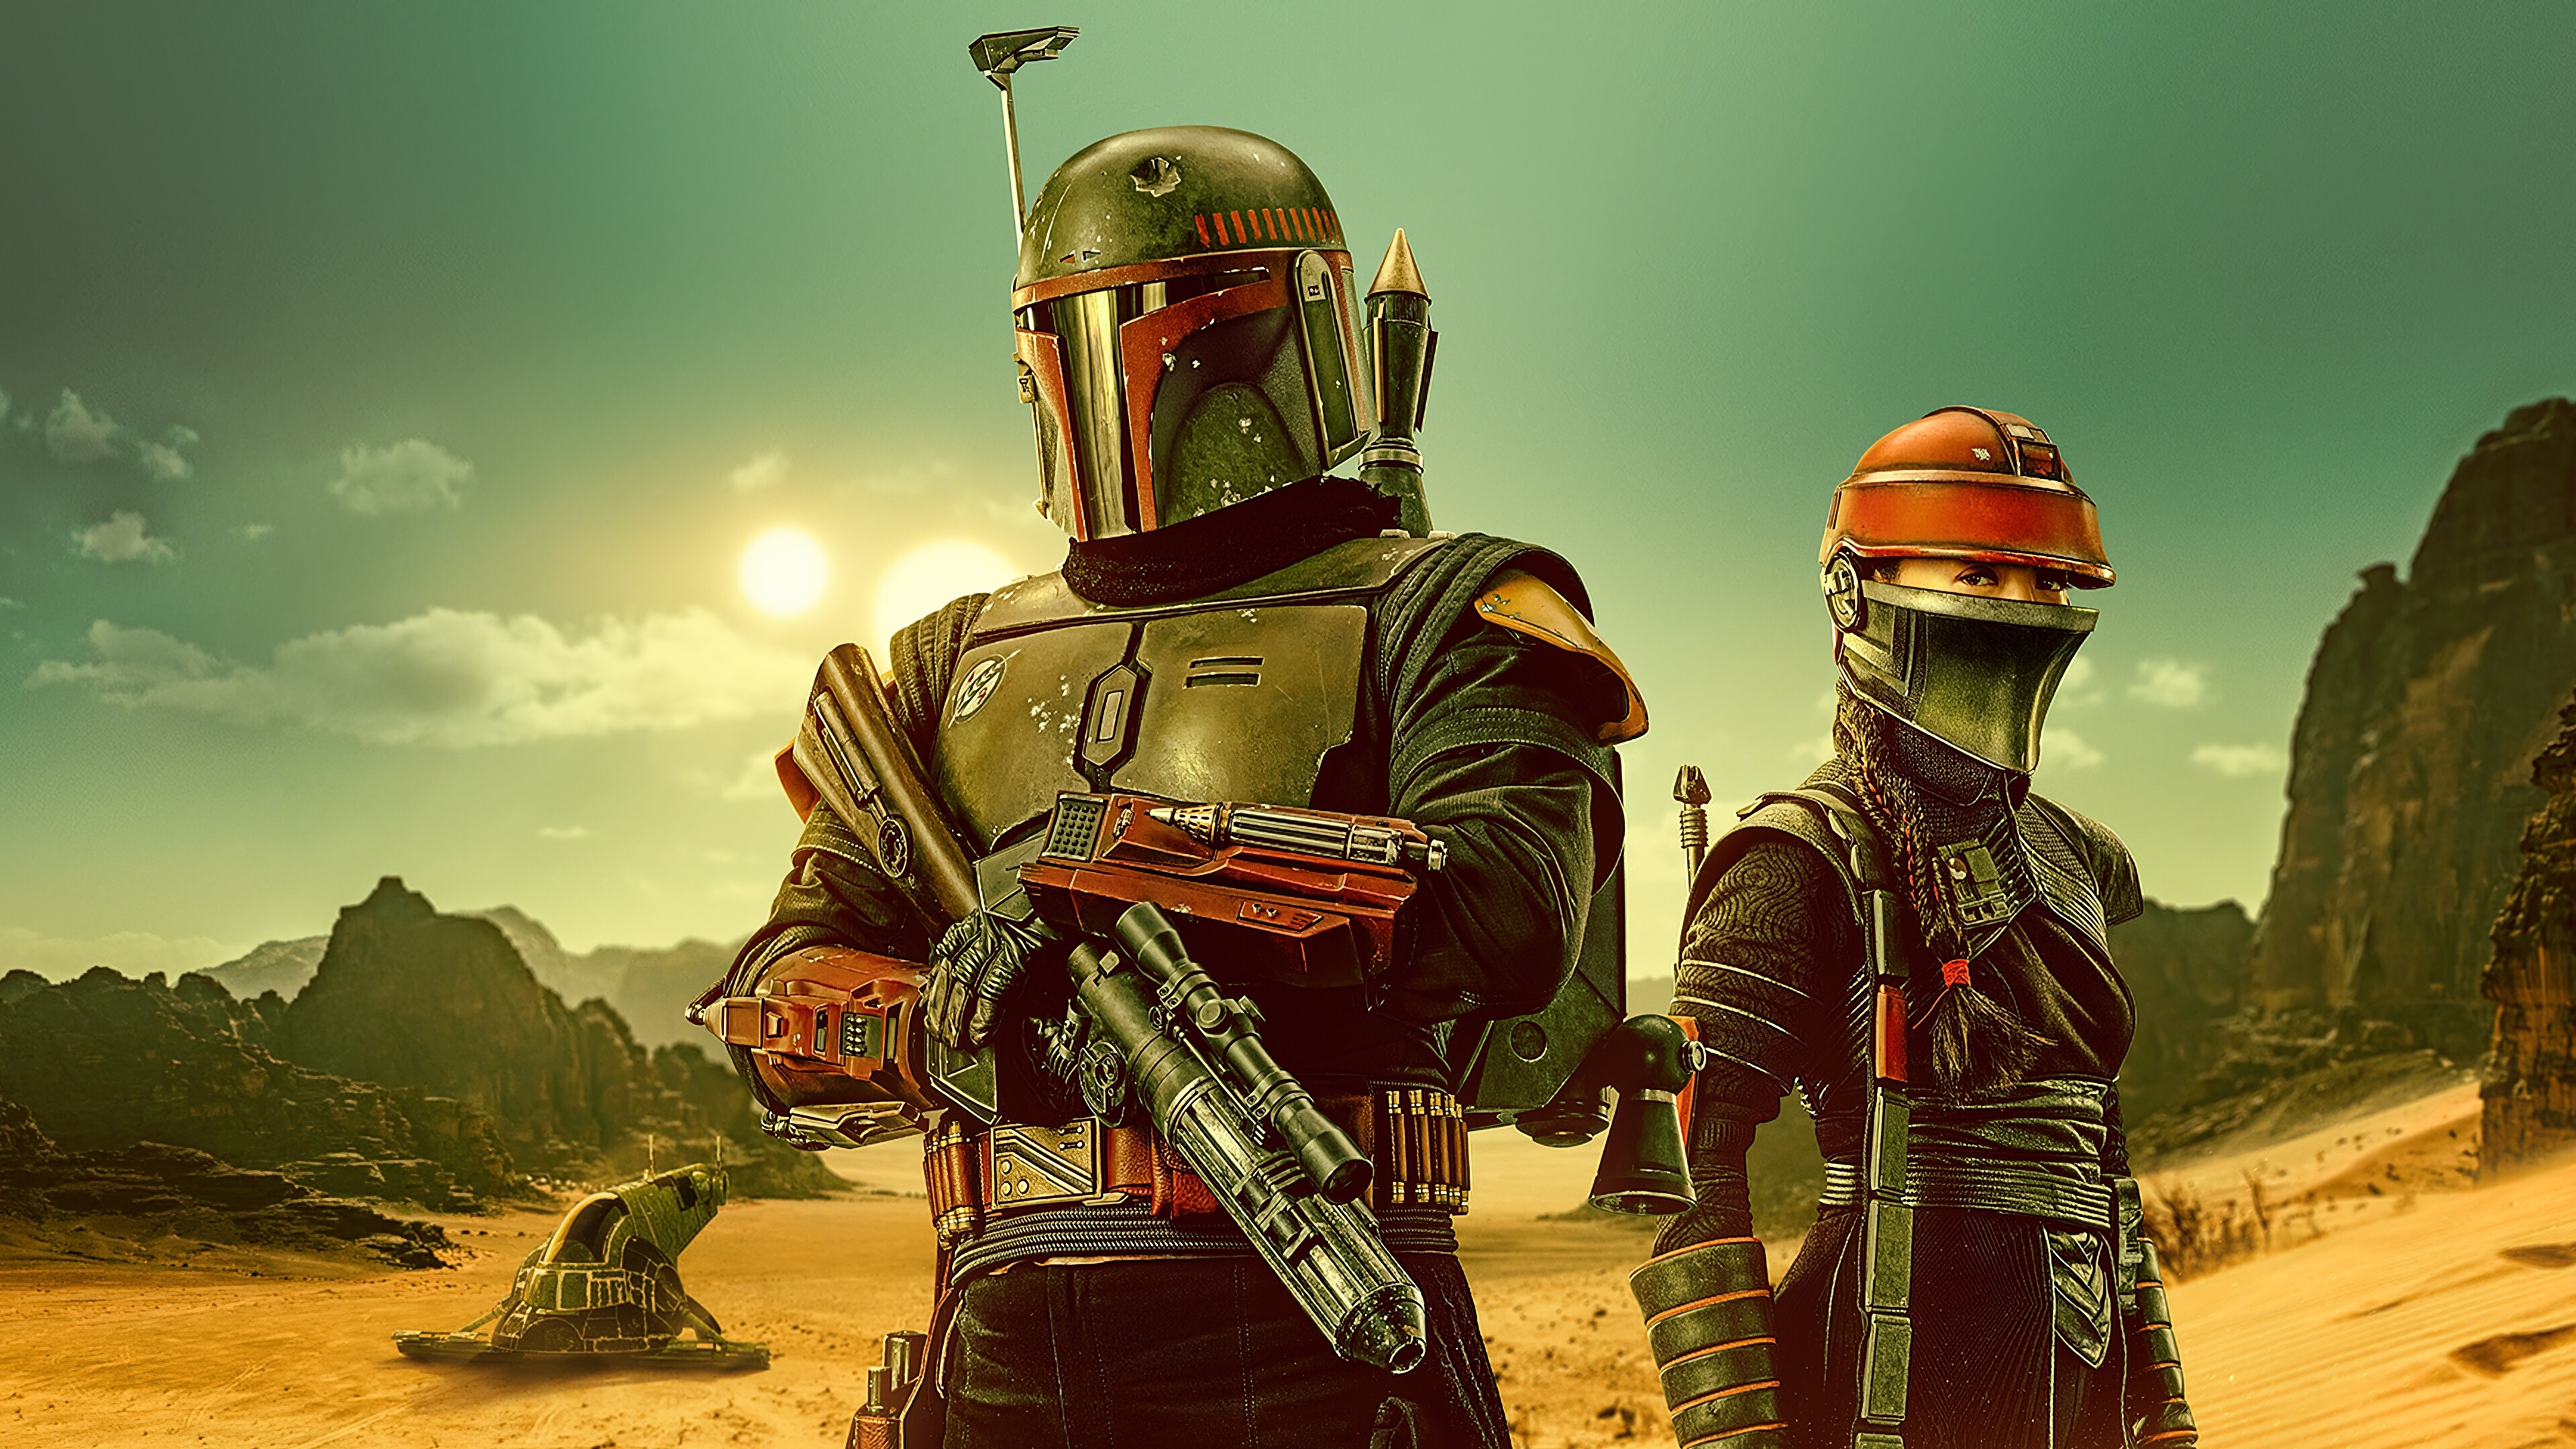 The Book of Boba Fett: A live-action television series, Star Wars franchise. 3840x2160 4K Wallpaper.